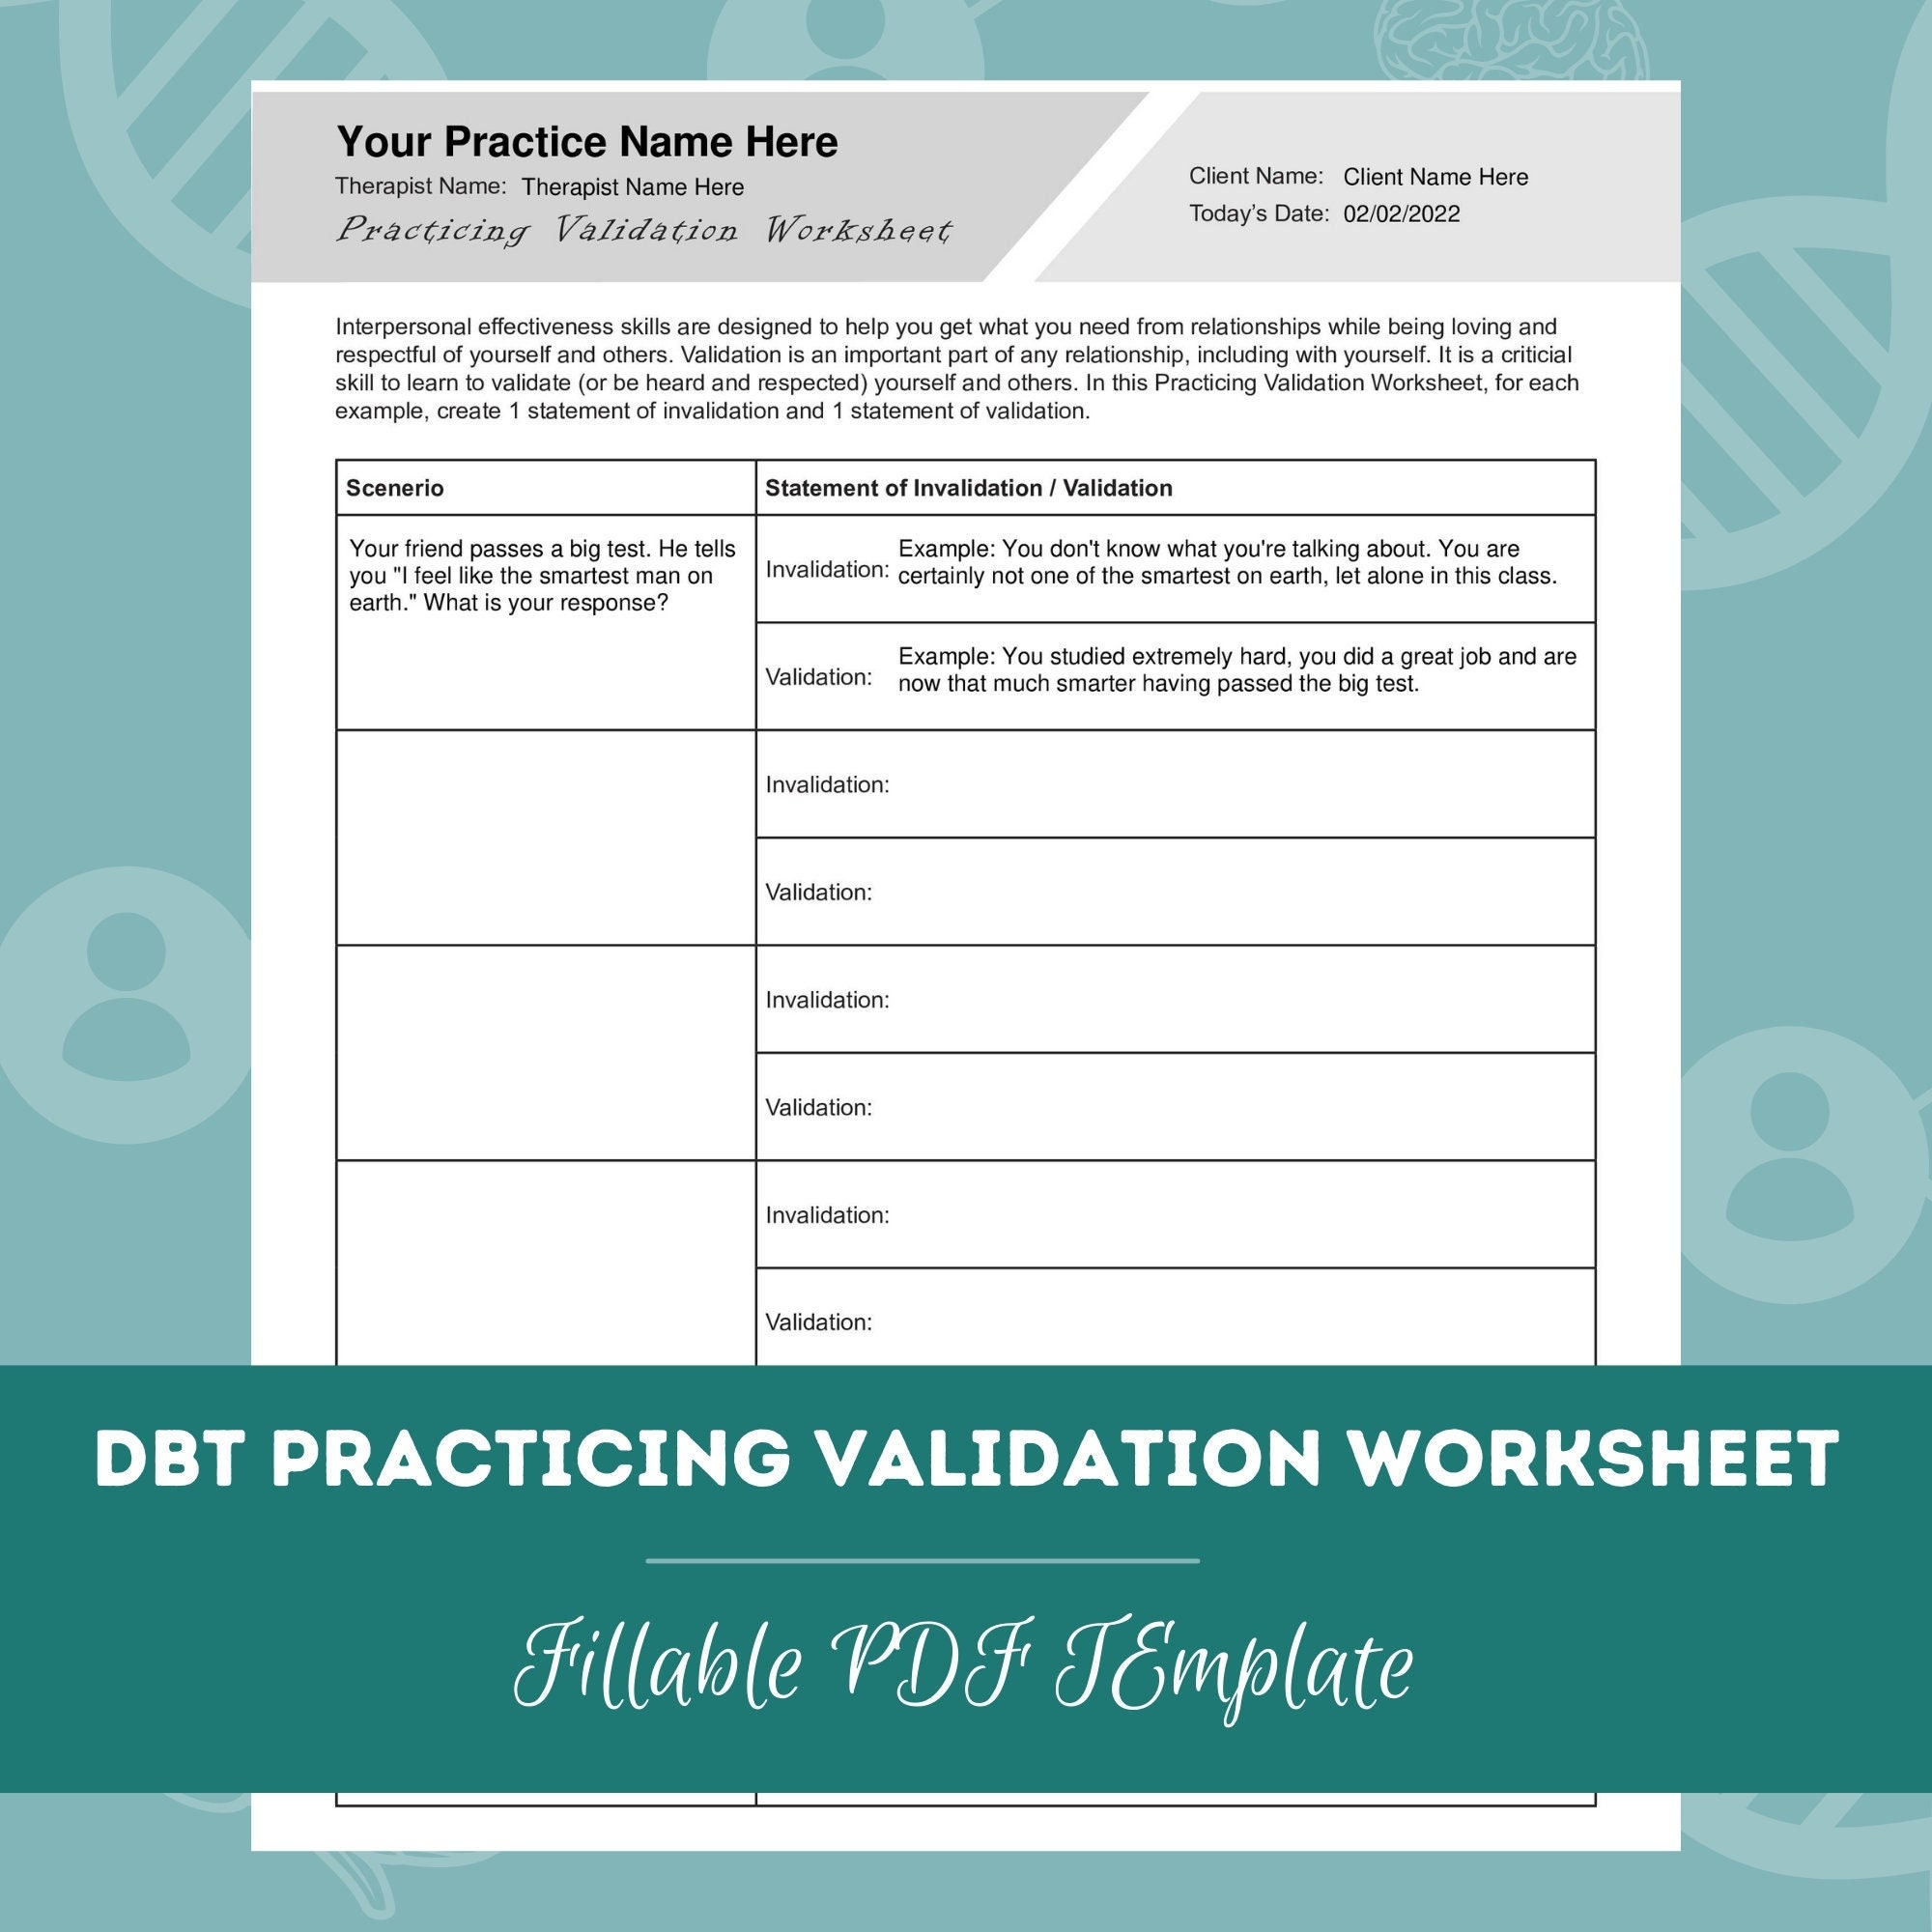 DBT Practicing Validation Worksheet Editable Fillable PDF Template For Counselors Psychologists Social Workers Therapists Etsy